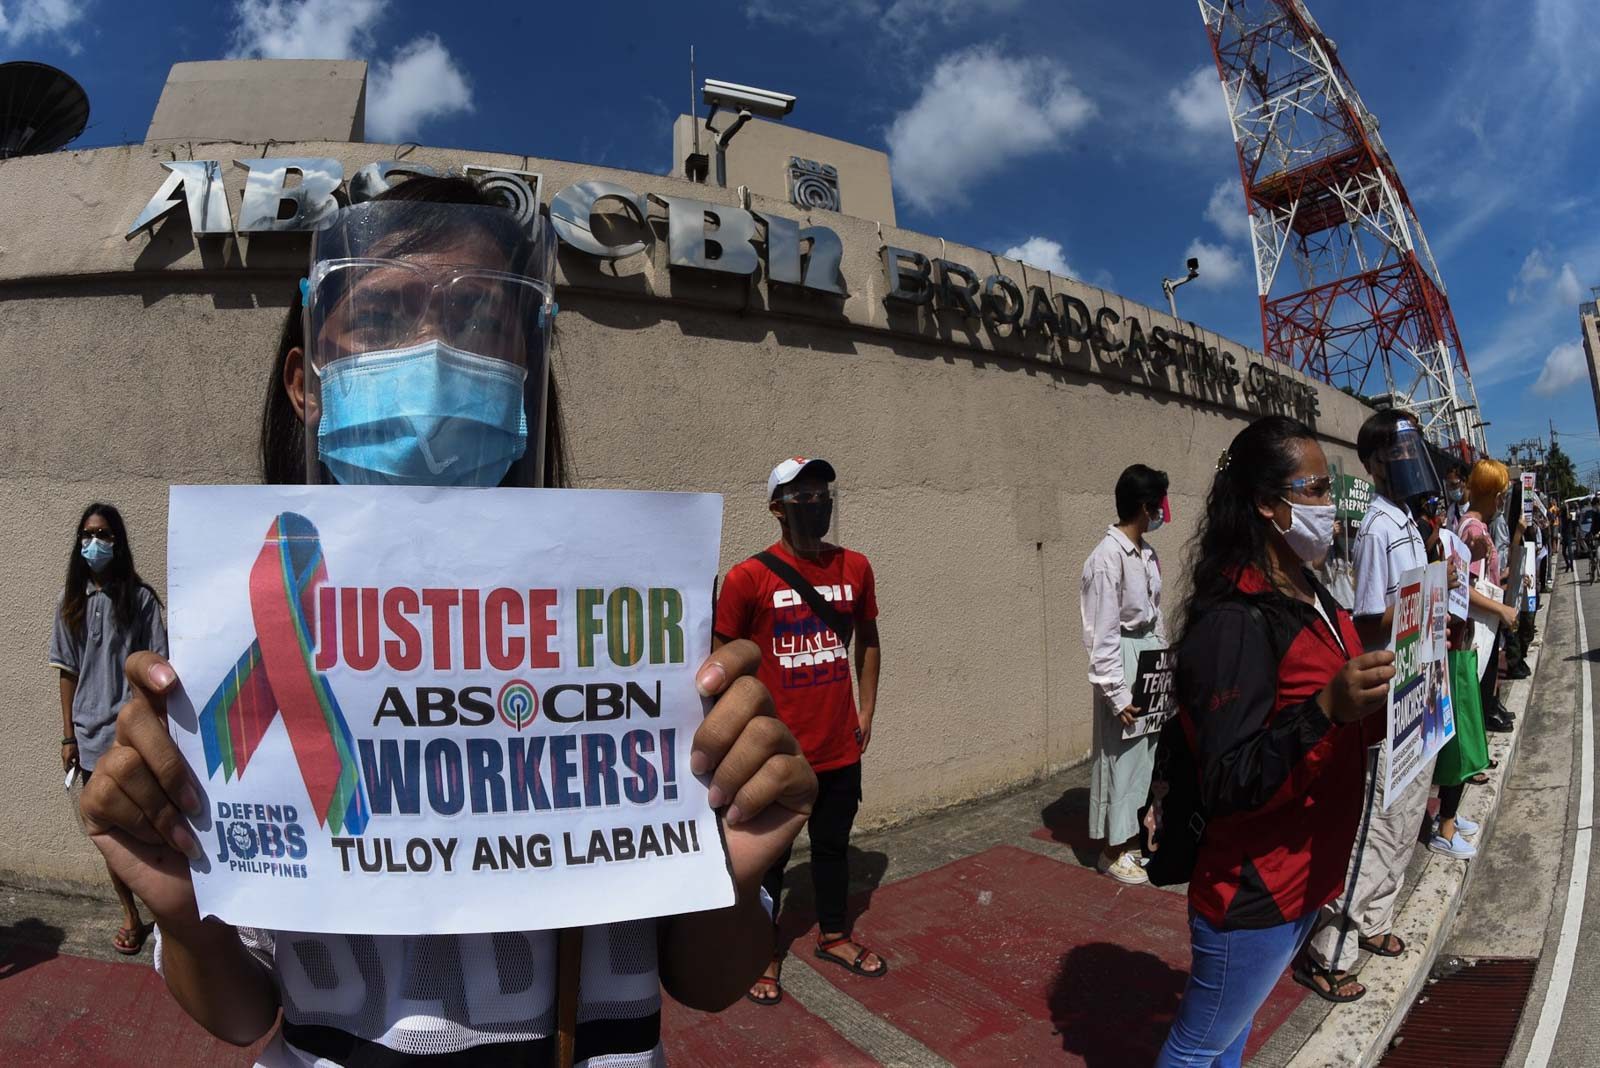 #KapamilyaForever: Tears, hope, defiance as ABS-CBN employees lose jobs after franchise denial